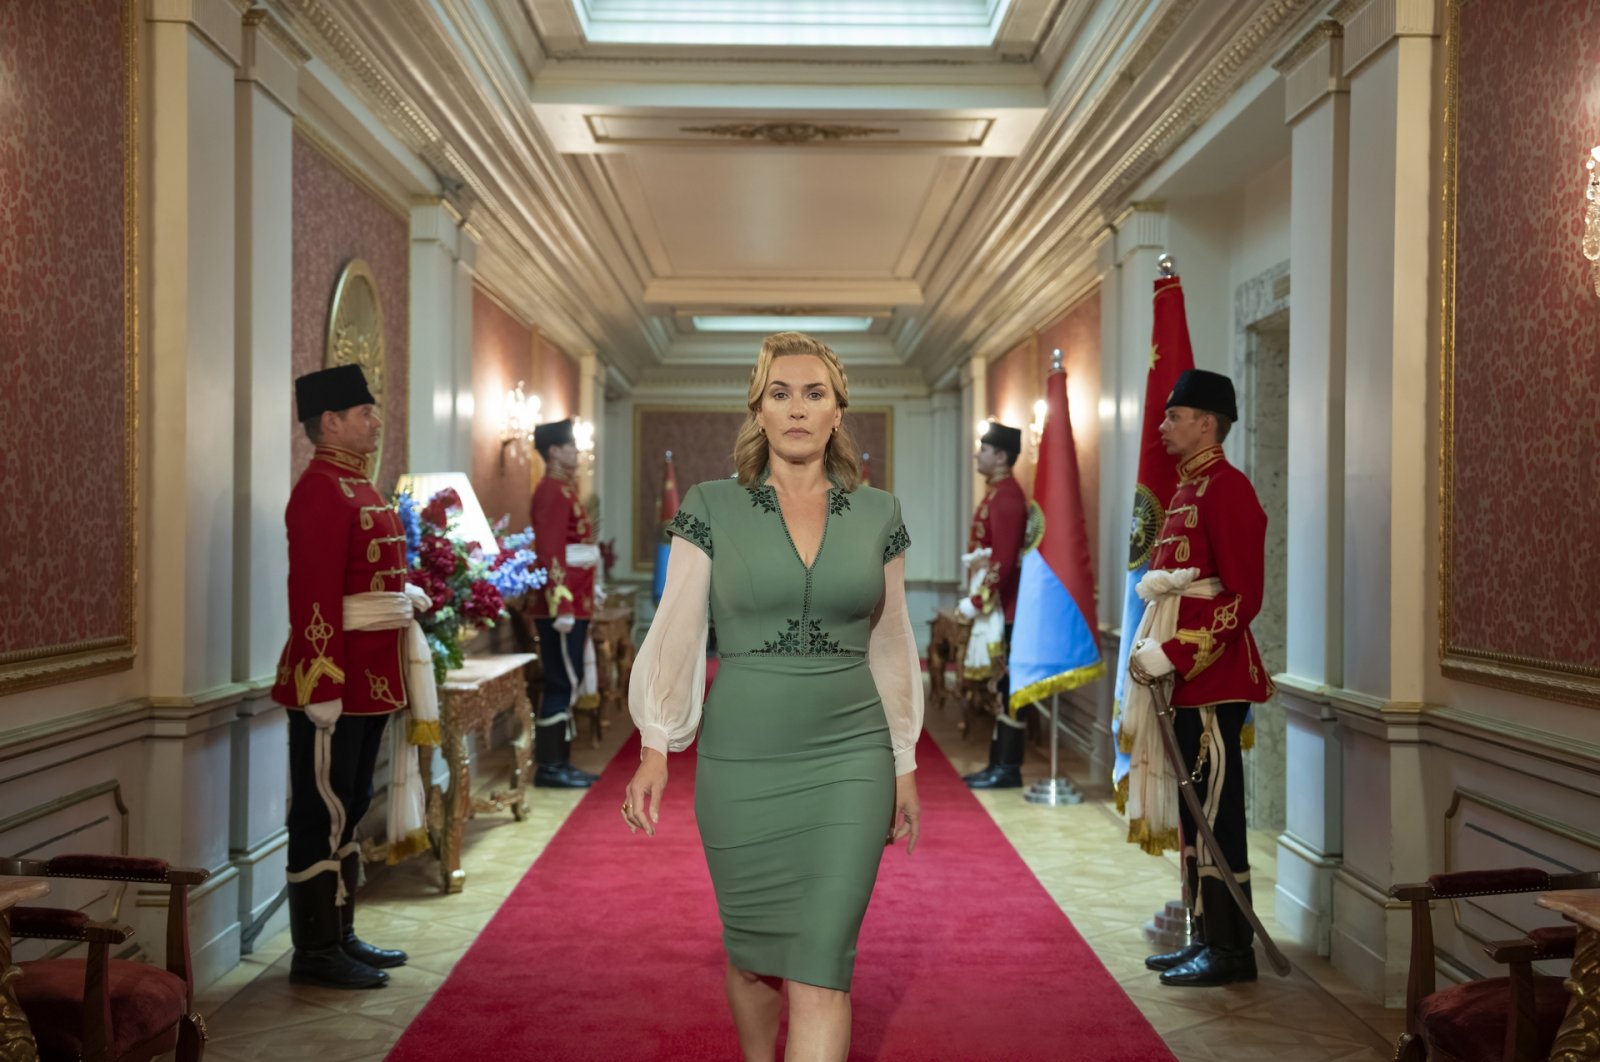 &quot;The Regime,&quot; a new series starring Kate Winslet as the paranoid dictator of an unnamed Central European republic, is now streaming weekly episodes to subscribers of HBOMax and Sky. (dpa Photo)